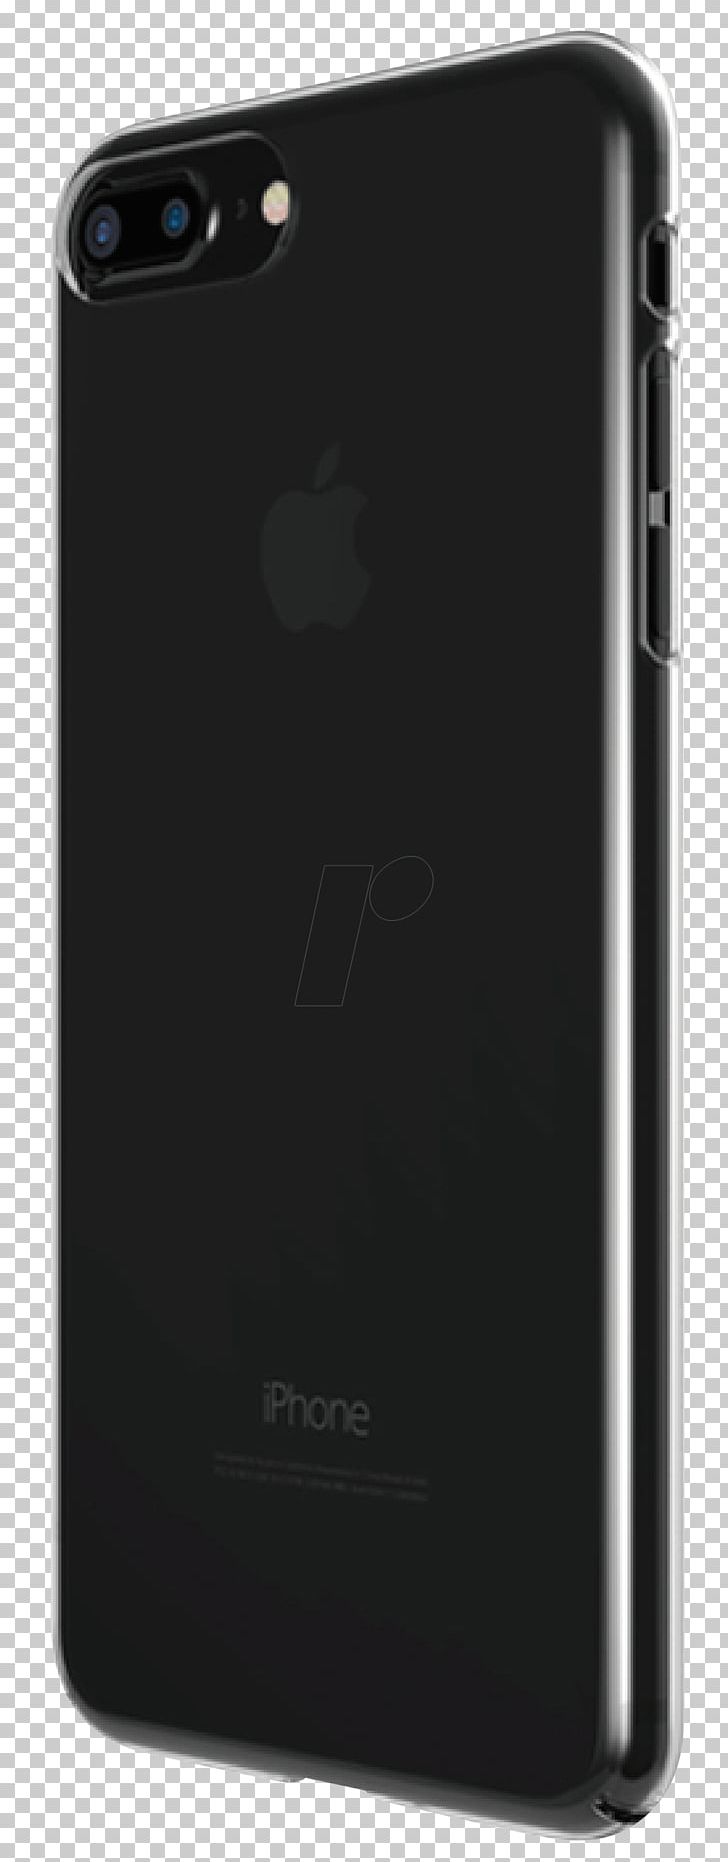 Huawei P8 Lite (2017) Huawei P9 Telephone 华为 Air Purifiers PNG, Clipart, Air Purifiers, Beslistnl, Black, Case, Electronic Device Free PNG Download